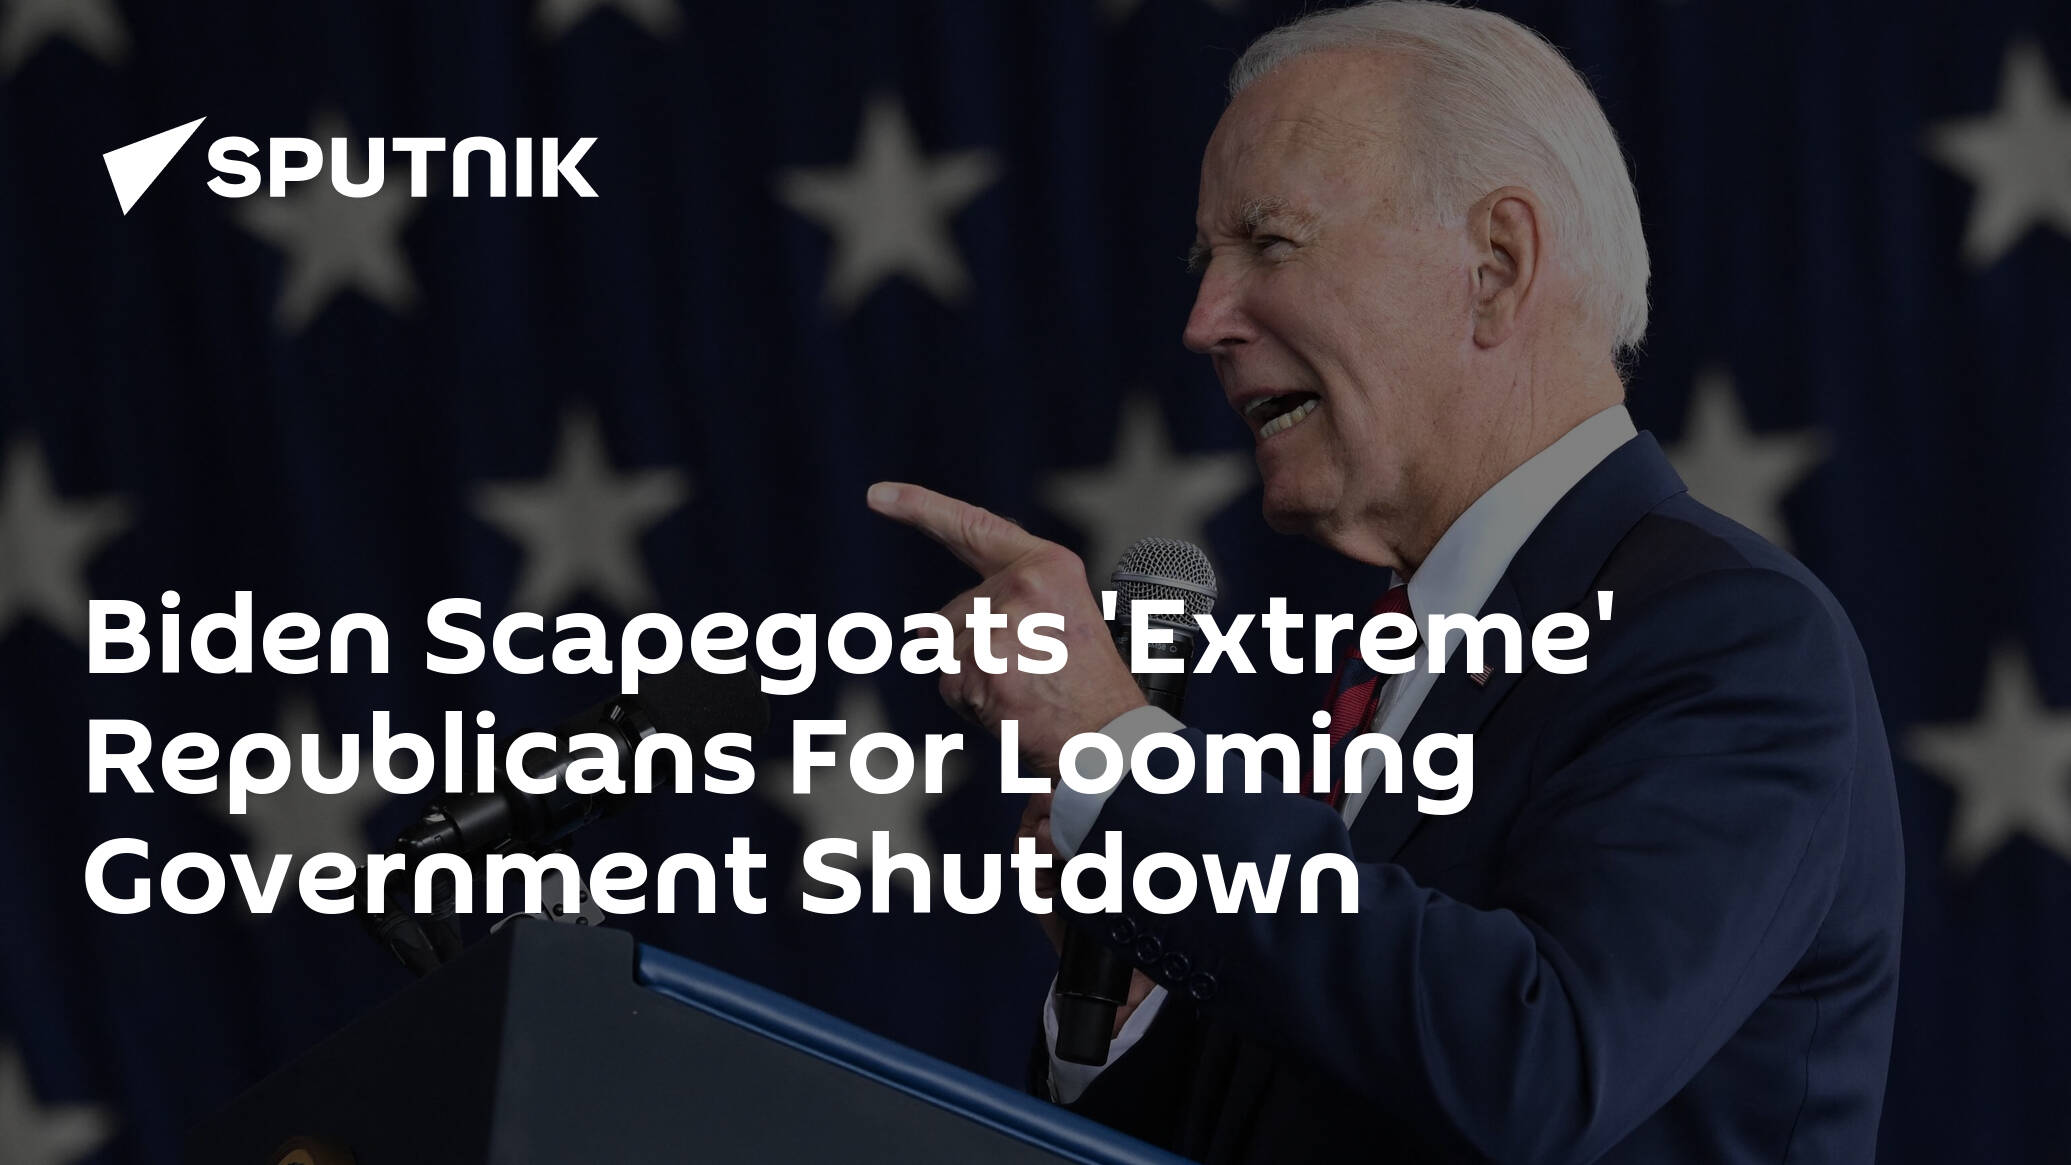 Biden Scapegoats 'Extreme' Republicans For Looming Government Shutdown